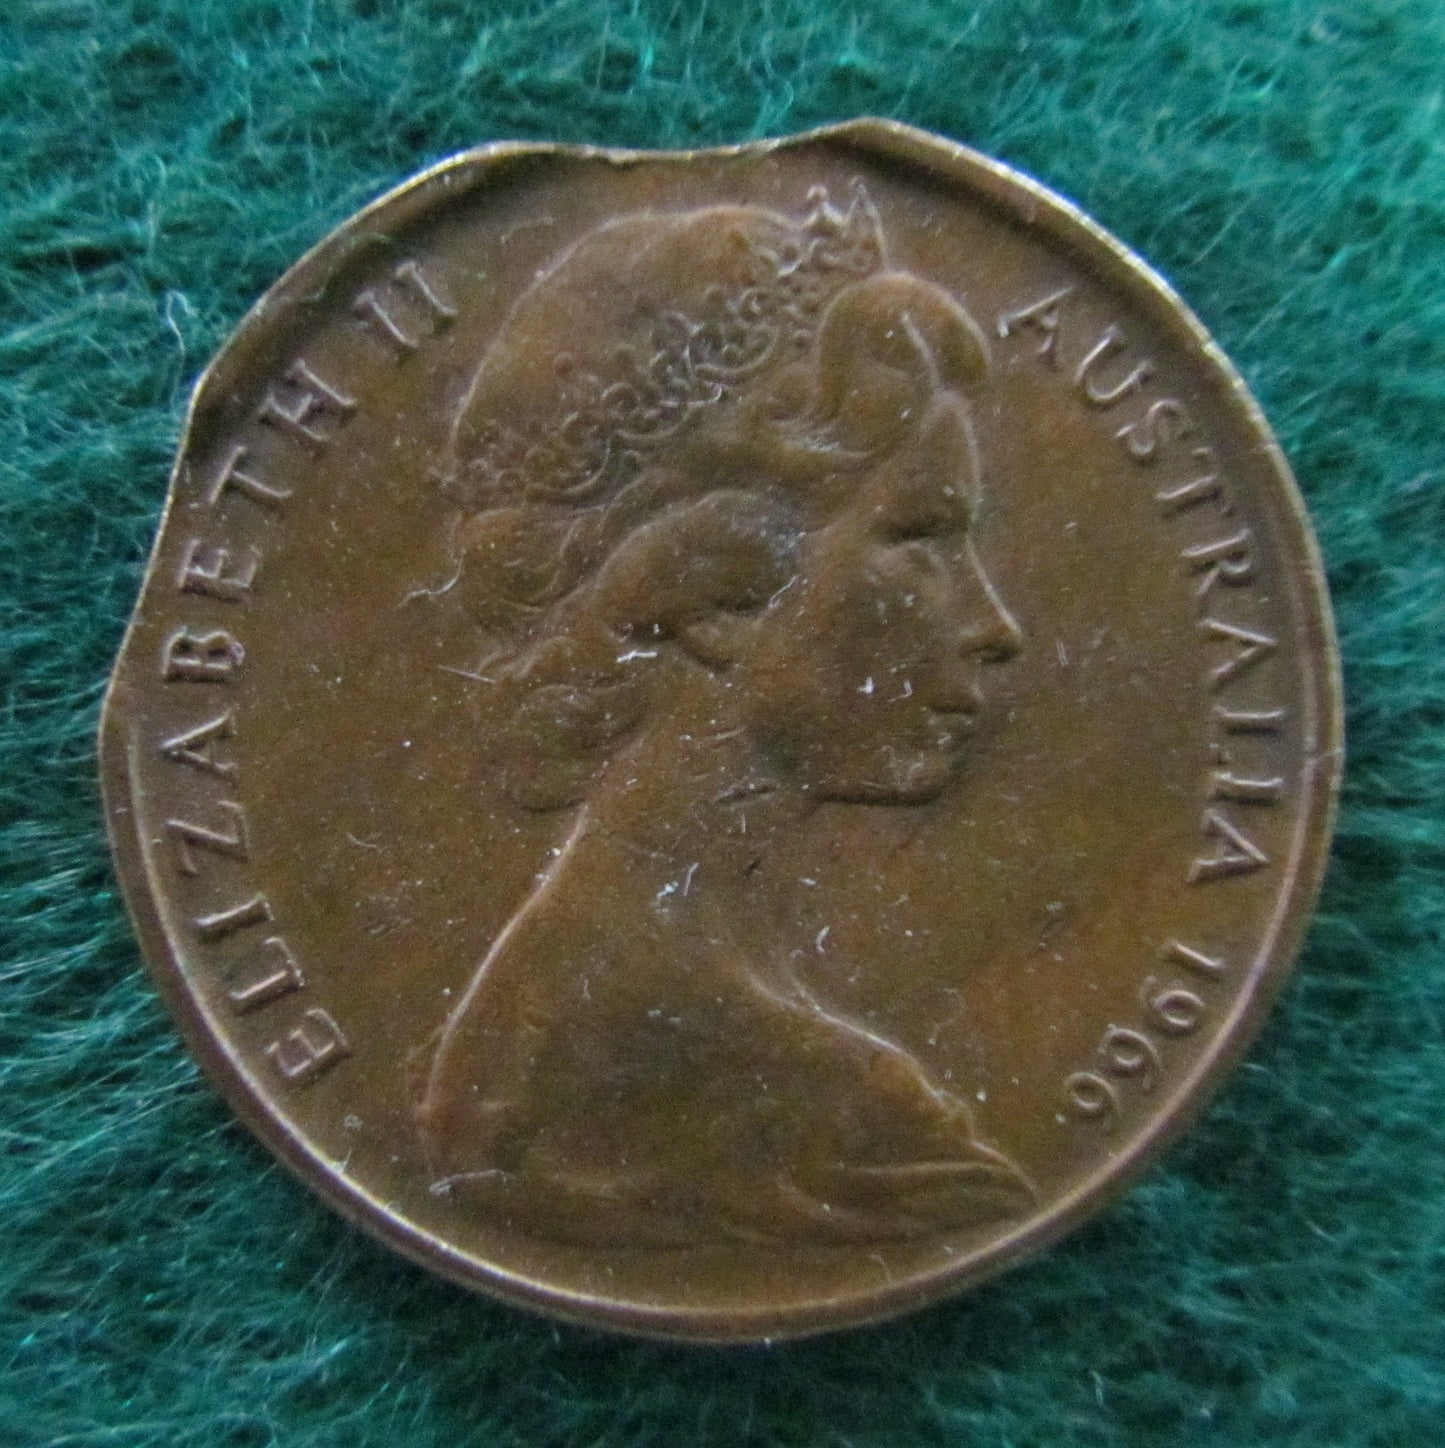 Australian 1966 2 Cent Queen Elizabeth II Coin Double Clipped Variety